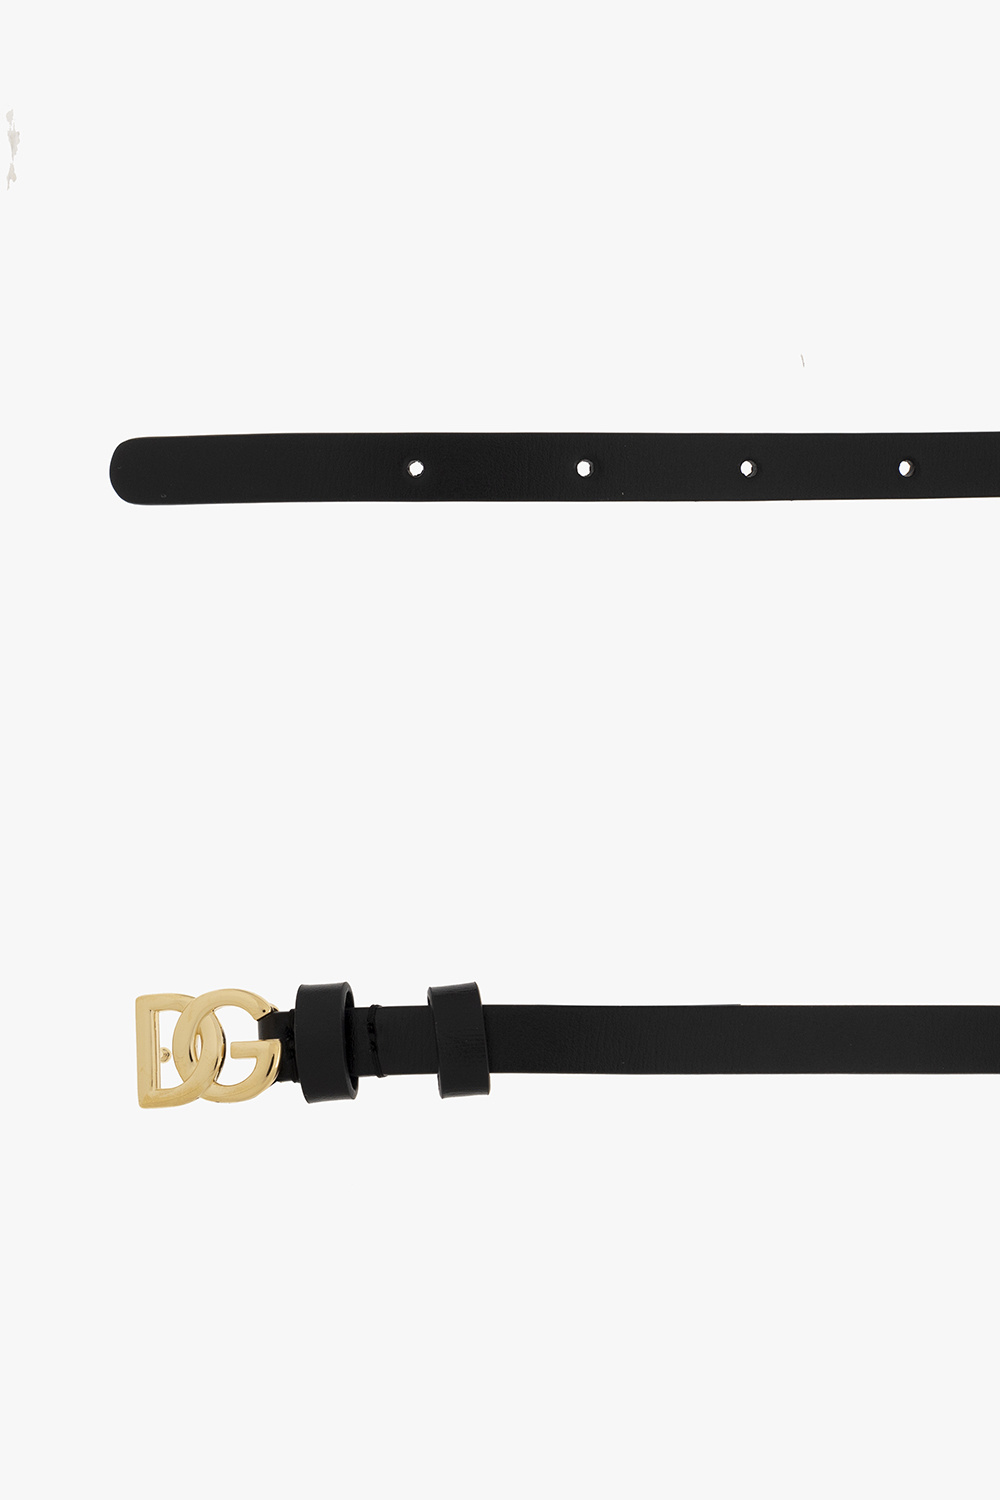 dolce SPACE & Gabbana Leather belt with logo